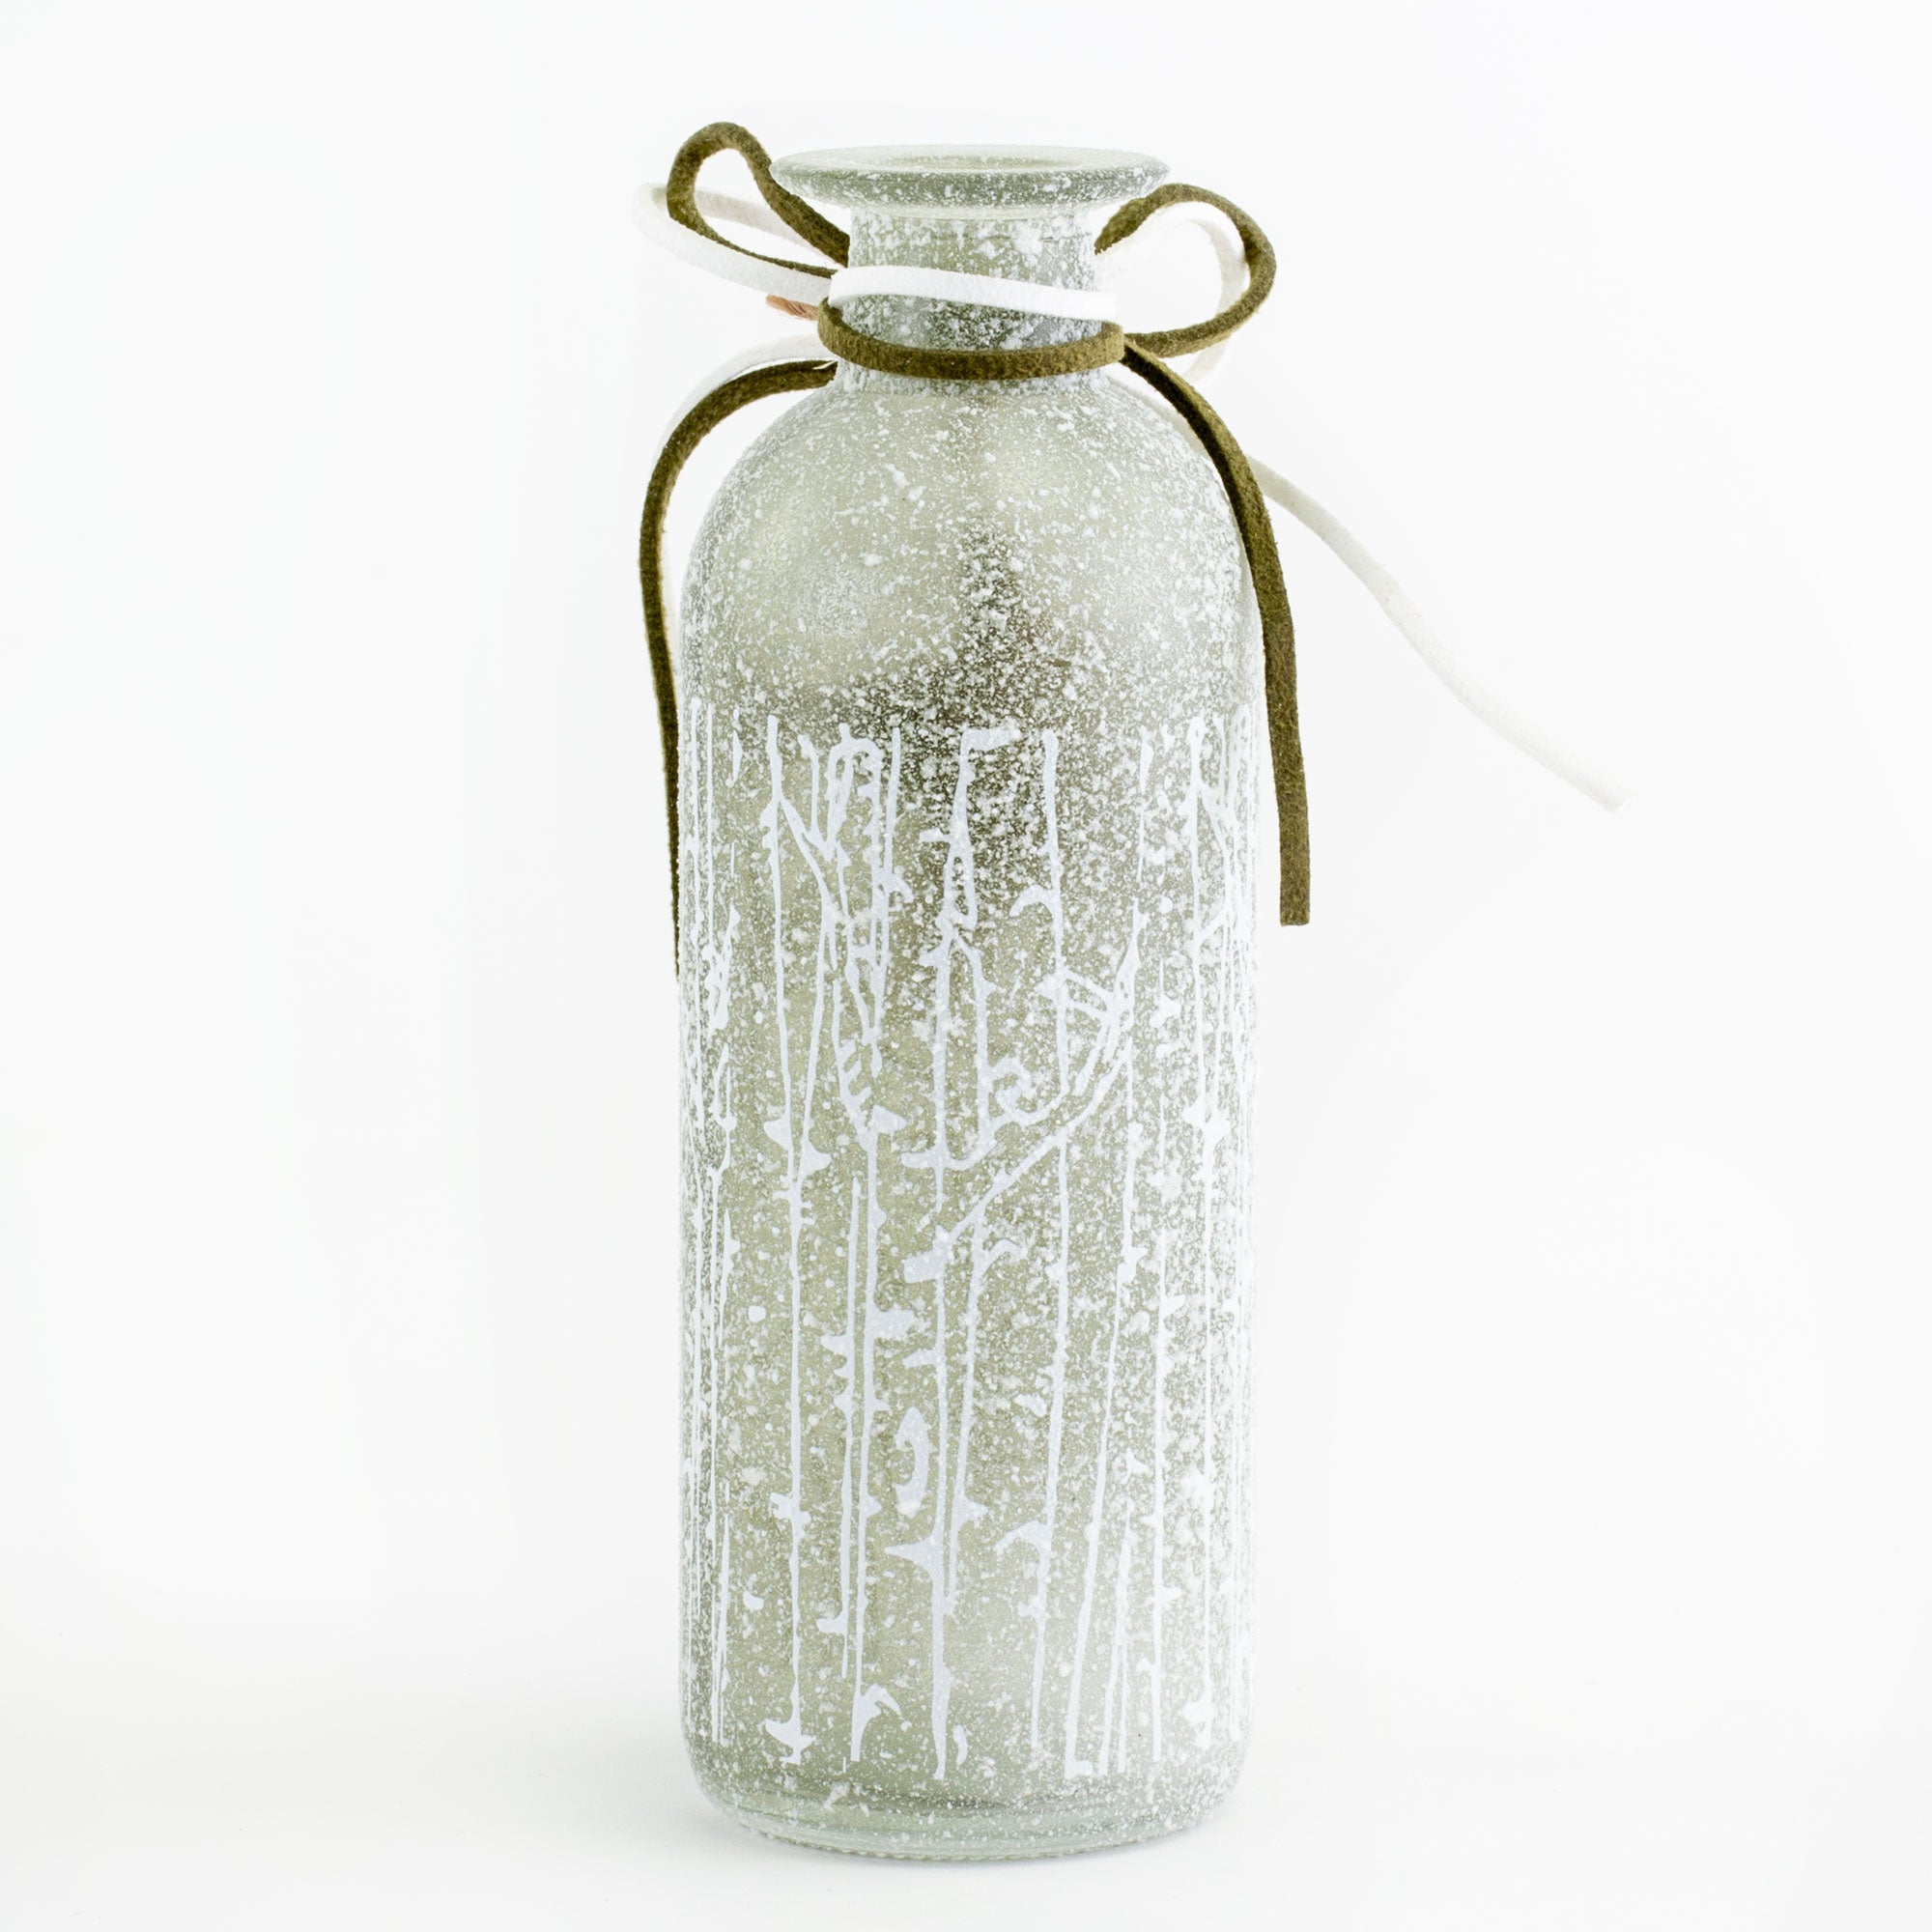 This image shows a pale green, frosted glass vase, with a medium wooden star tied around its neck, against a white background